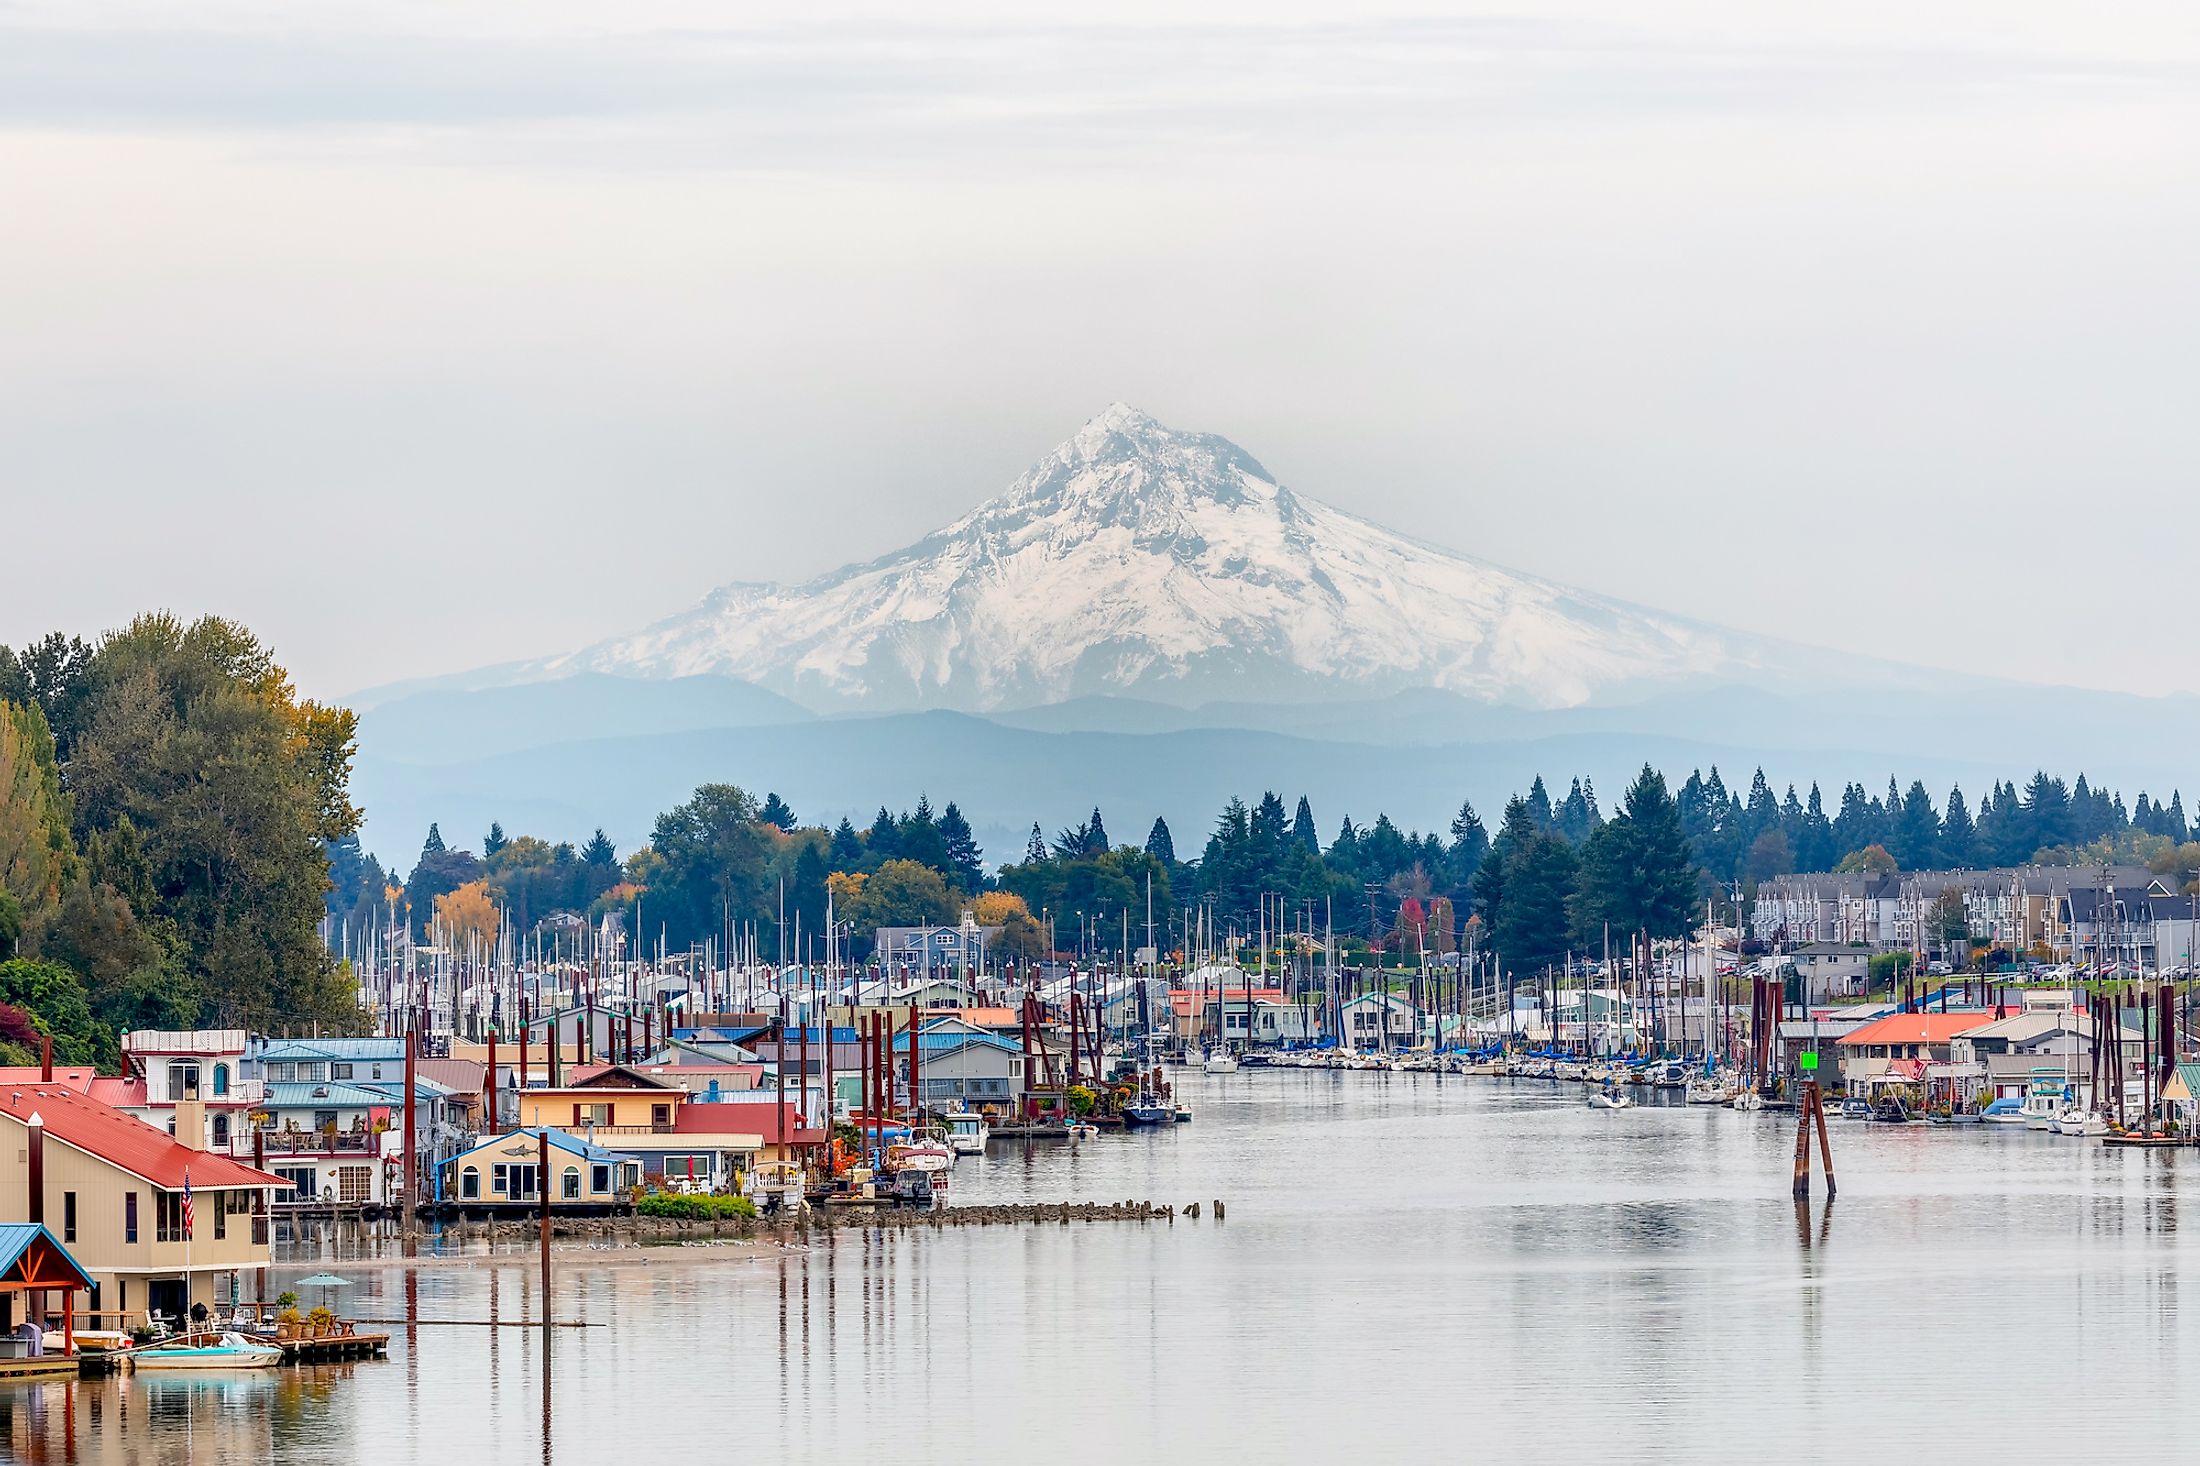 The gorgeous town of Hood River, Oregon.